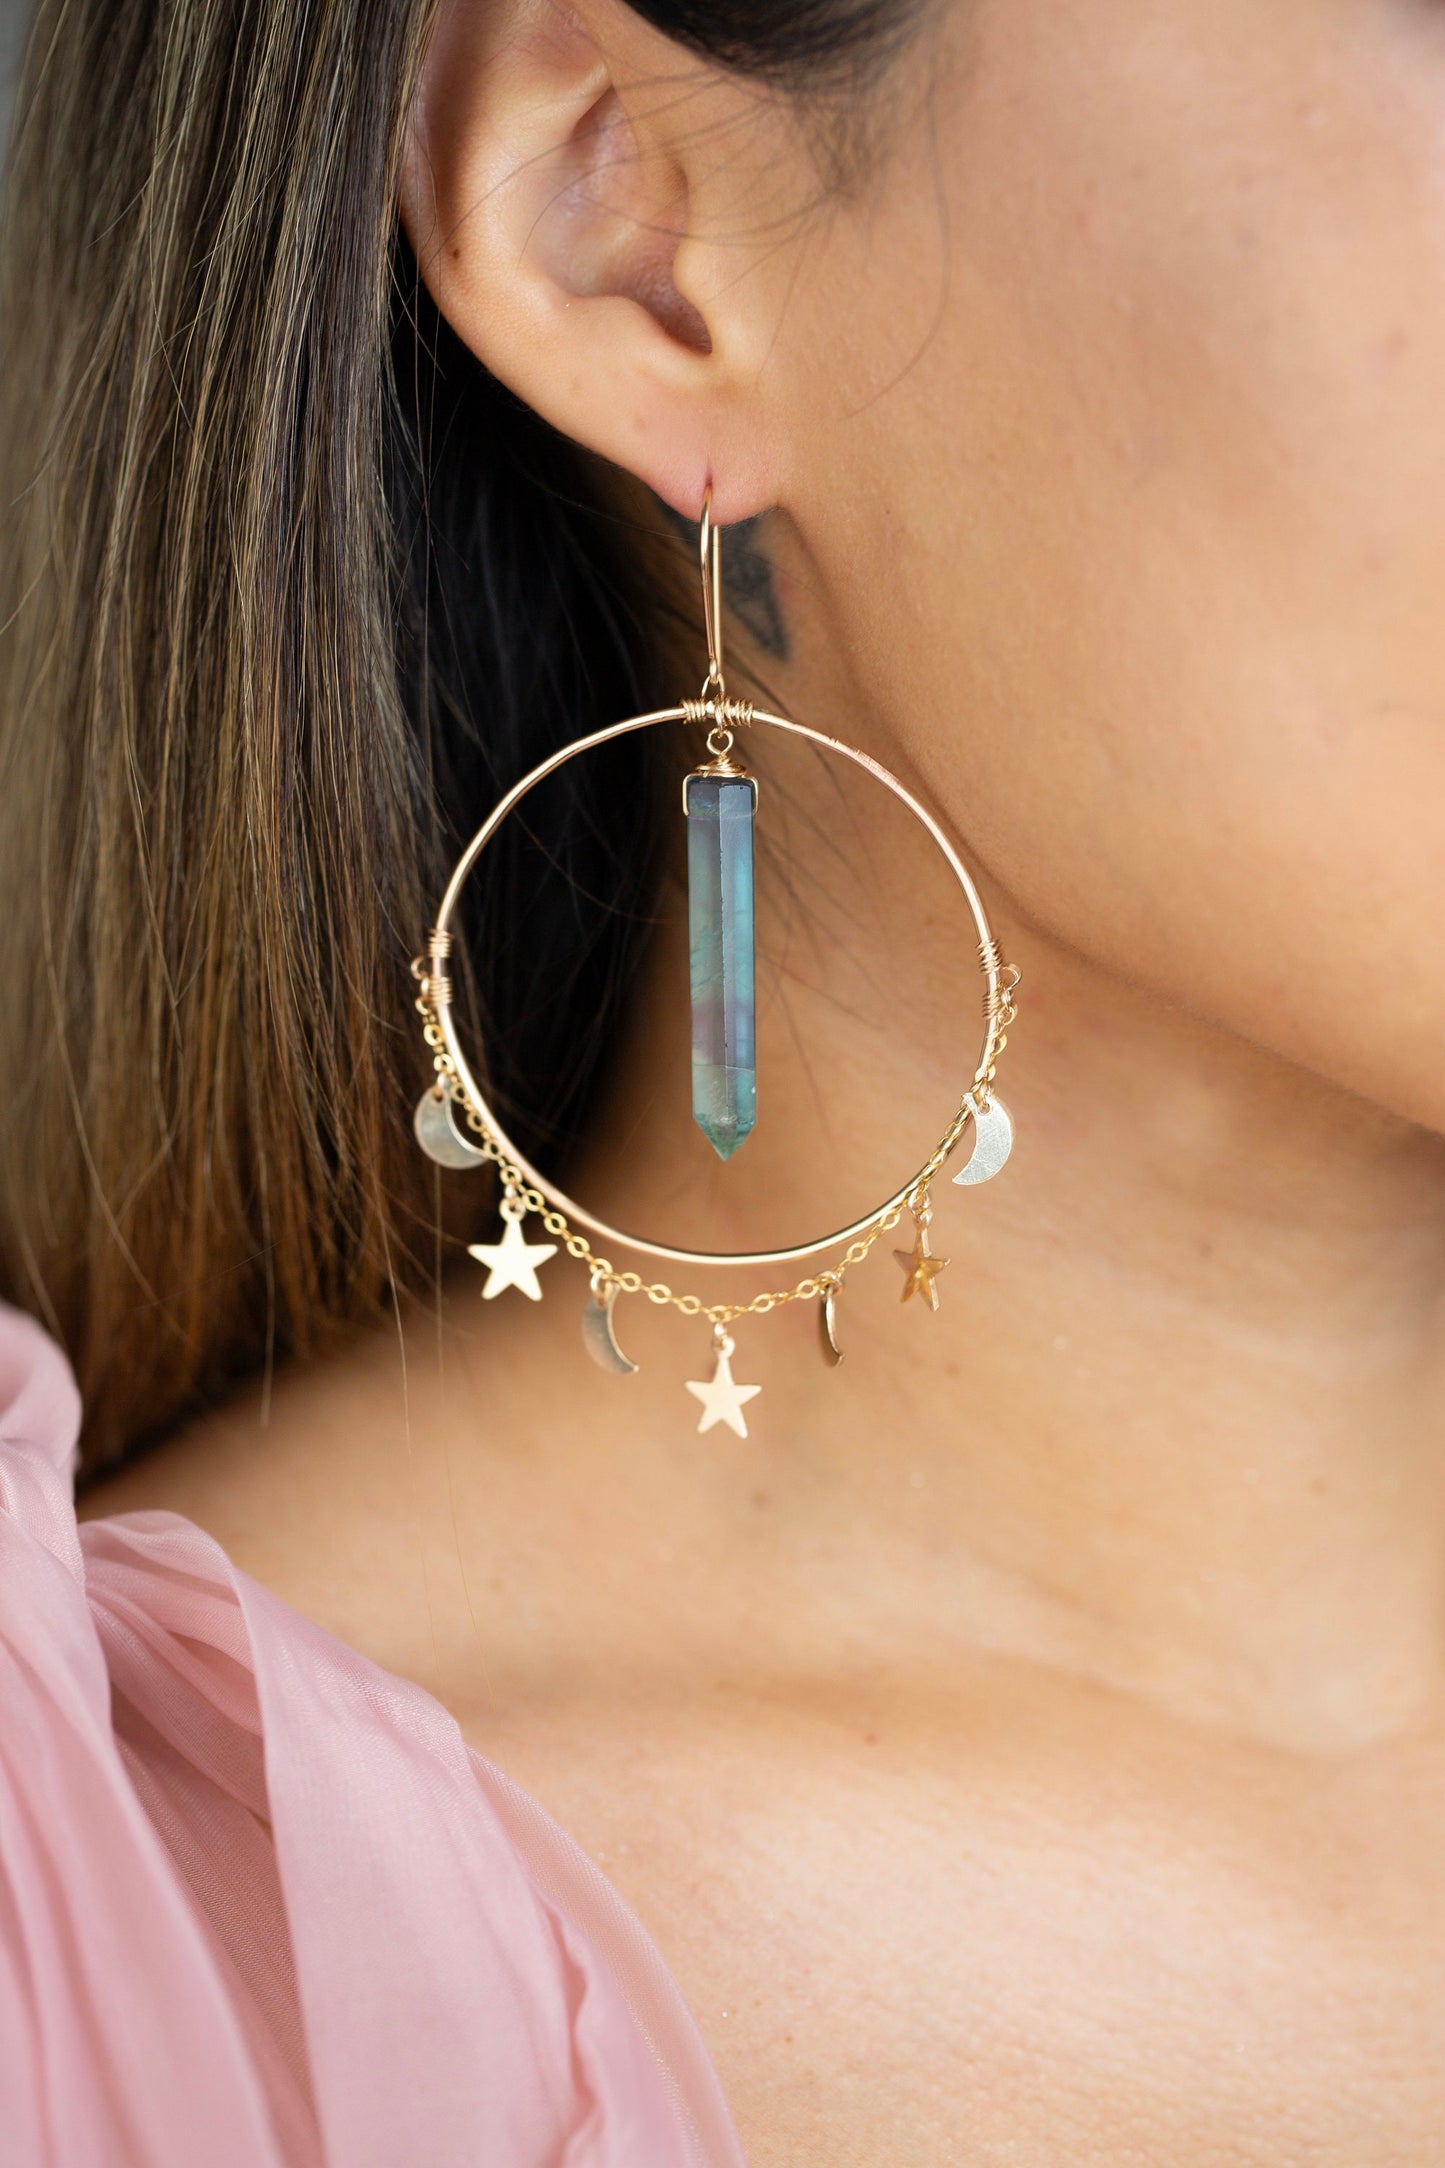 Moon and Star Crystal Hoop Earrings, Celestial Statement Earrings, Gypsy Hoop Earrings, Gold Moon Jewelry, Moon and Star Jewelry